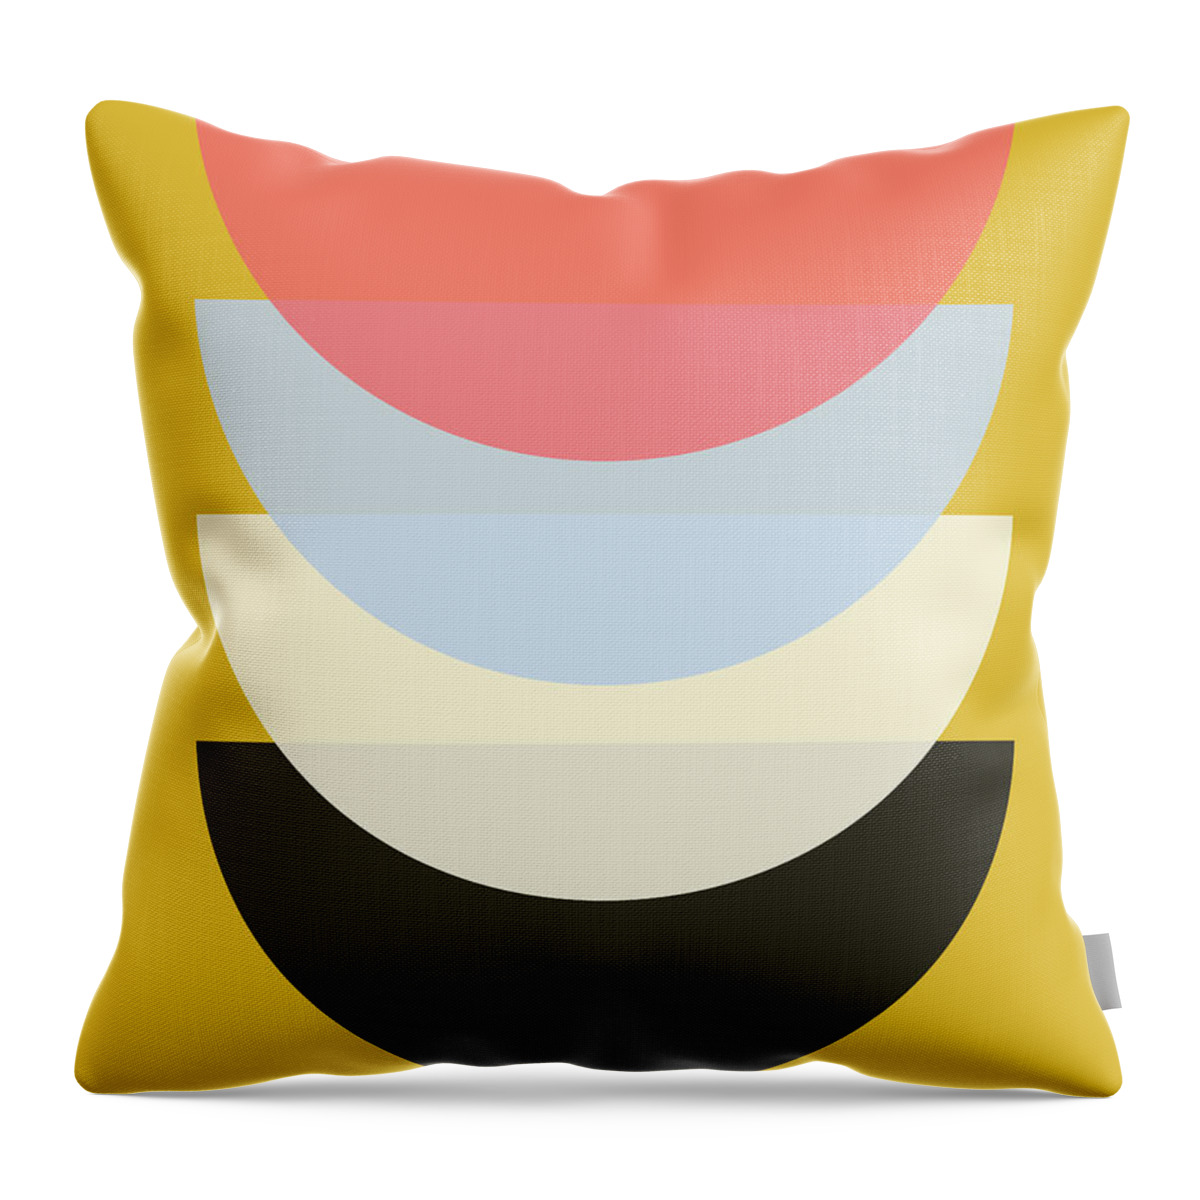 Nordic Throw Pillow featuring the digital art Scandinavian Bowls by Pati Photography